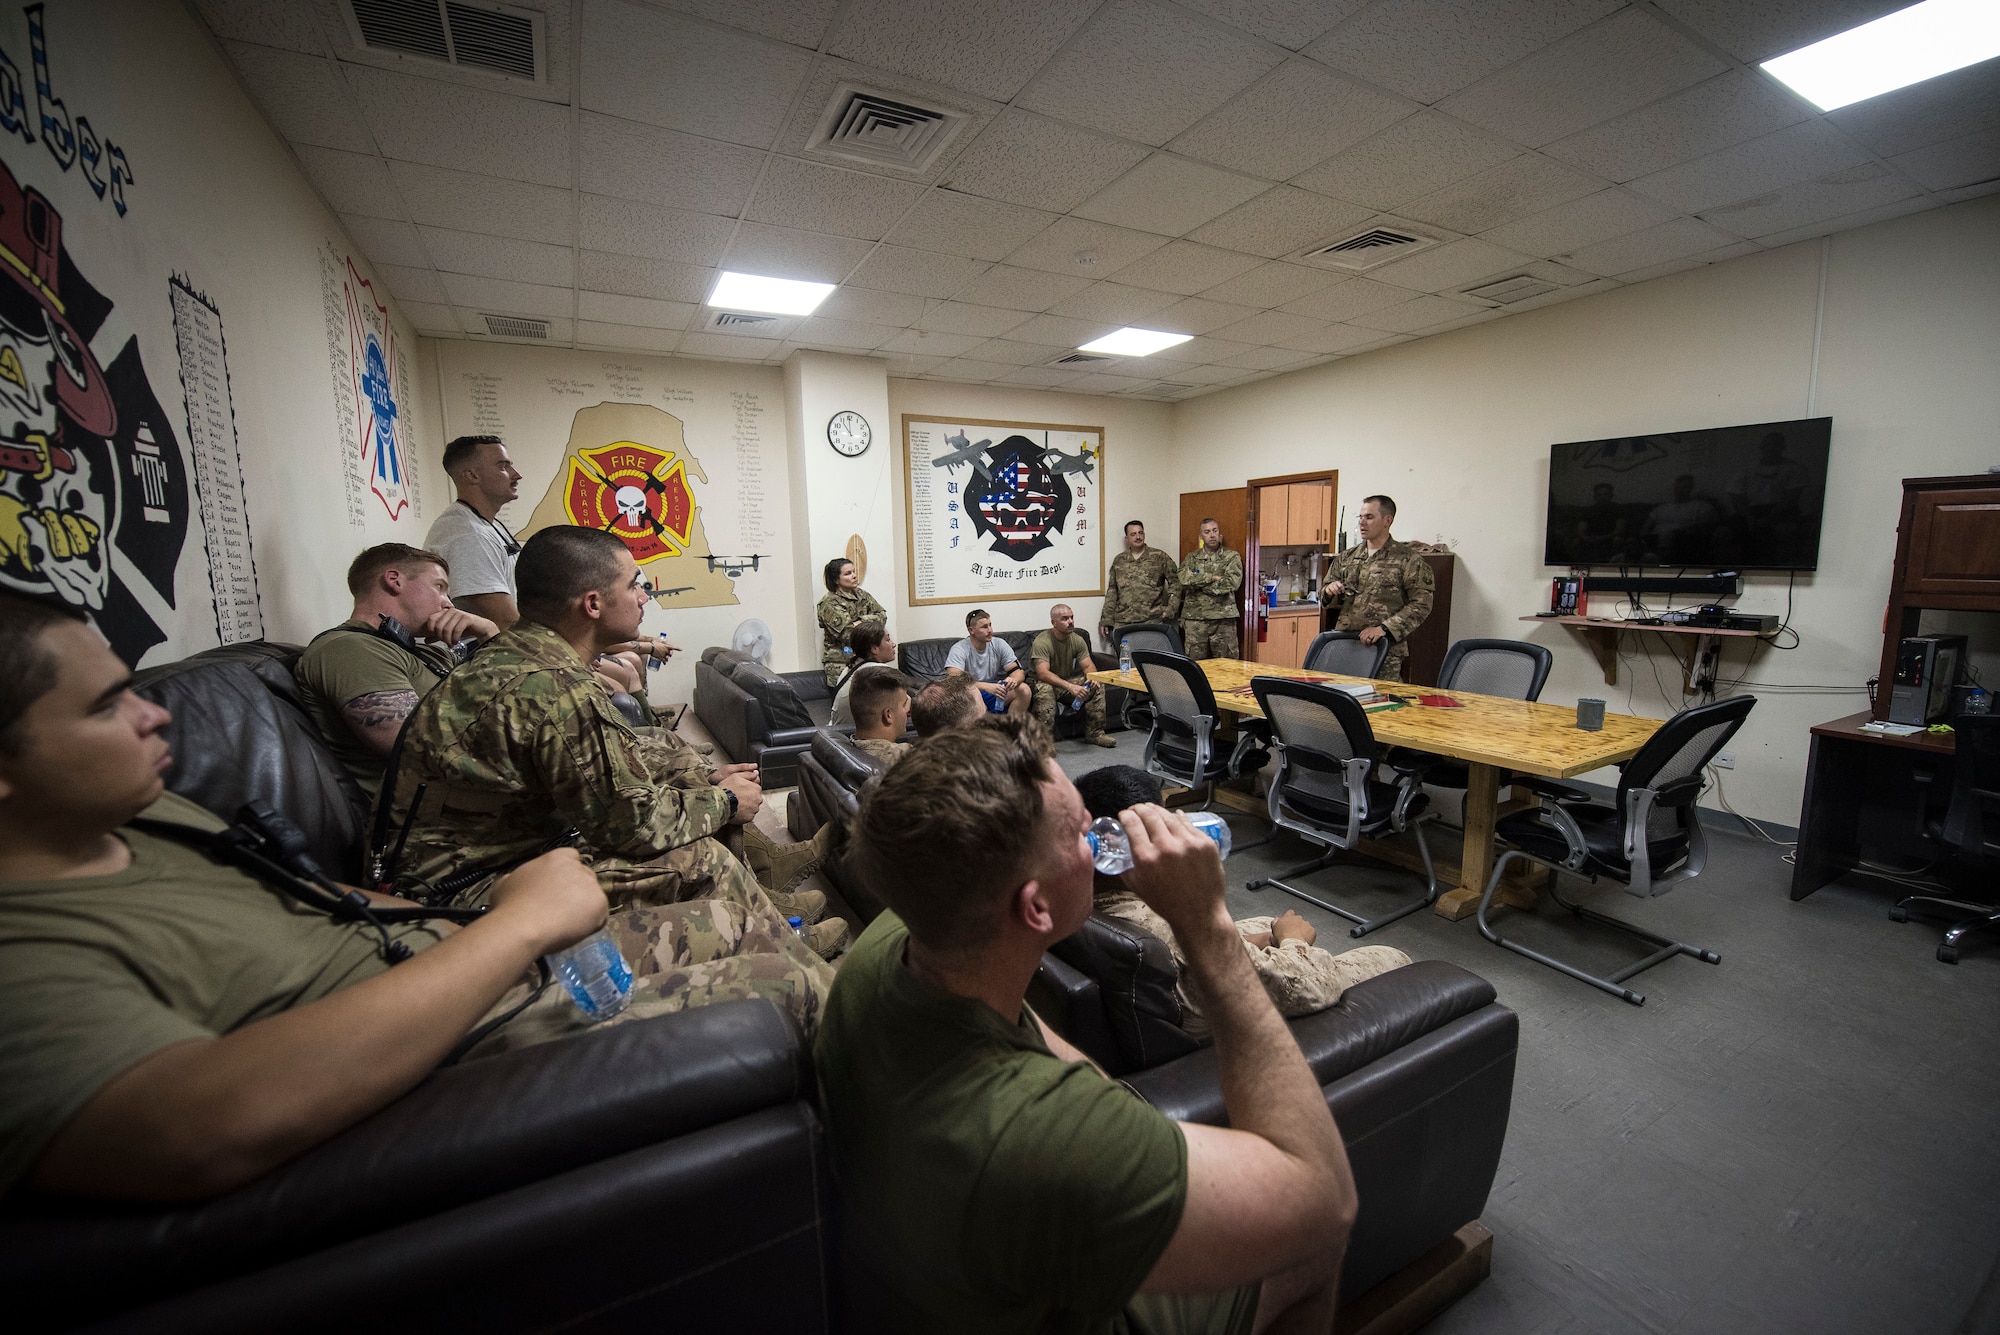 U.S. Airmen and Marine Corps firefighters participate in an after-action report meeting following an airfield exercise at Ahmed al-Jaber Air Base, Kuwait, Aug. 16, 2019. After training, the firefighters will conduct a meeting to discuss how the exercise went and ways to improve their response. (U.S. Air Force photo by Senior Airman Lane T. Plummer)